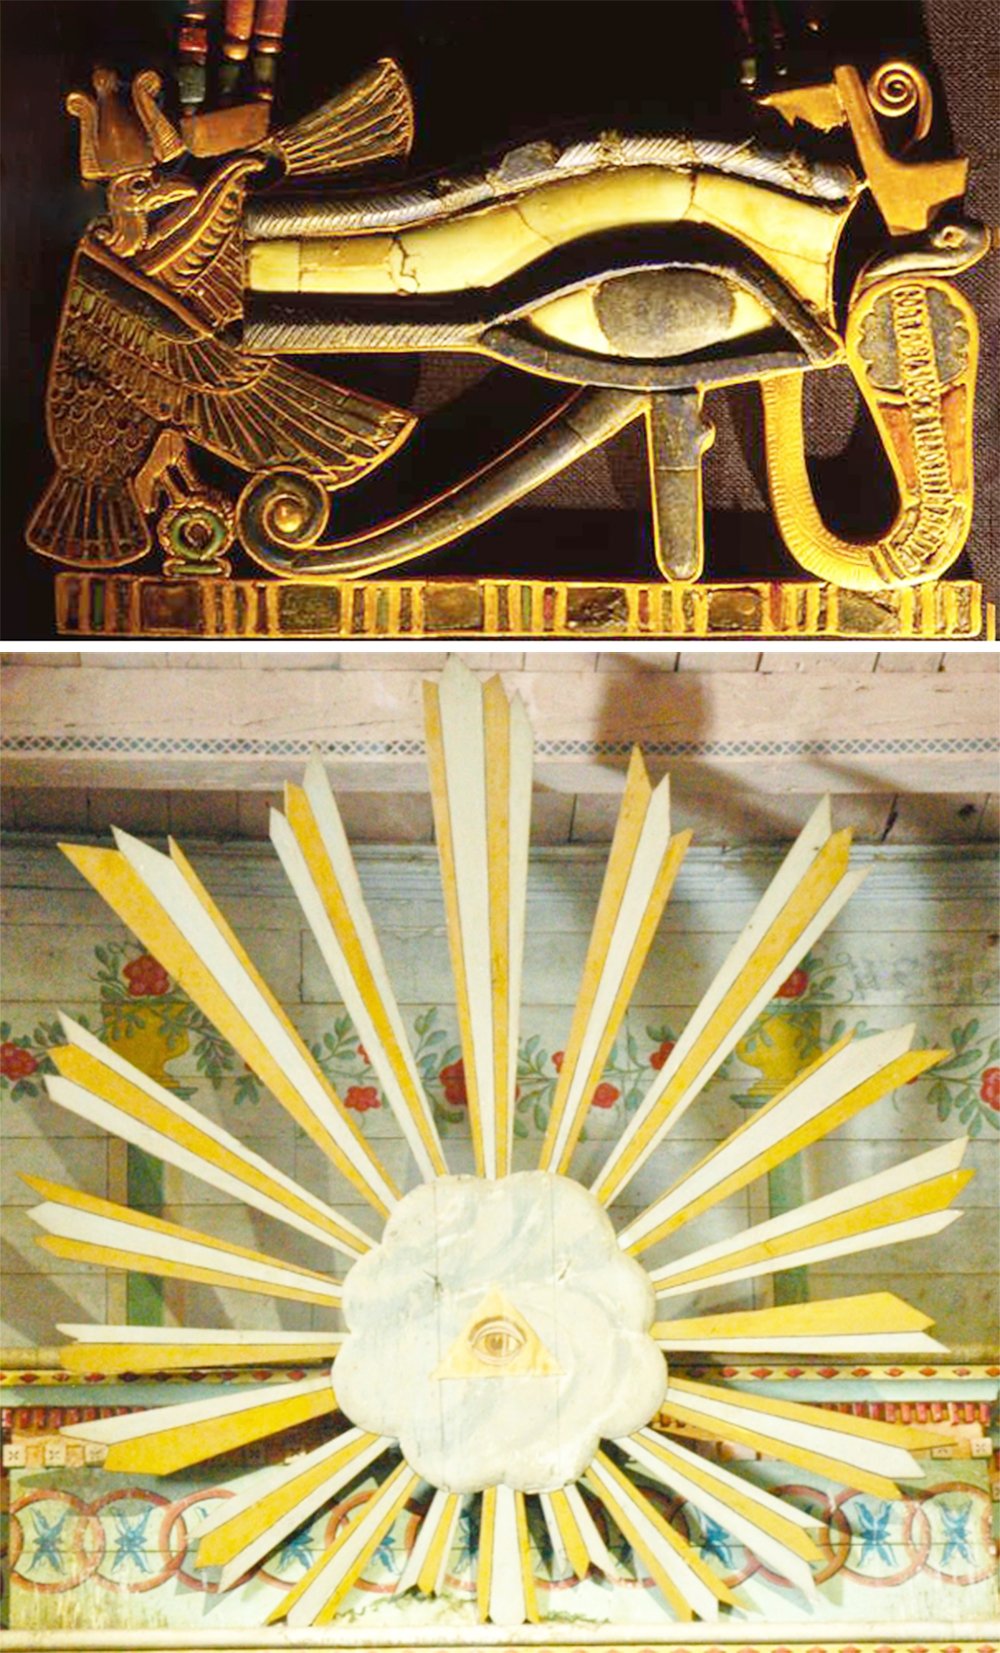 The collage is a combination of two images that show different artifacts. The image on the top is a photo of a statue is called the Ba of Tutankhamun, and it represents the soul of the pharaoh. It features a prominent Eye of Horus. The image on the bottom features a religious symbol of an eye inside a cloud with light beams coming out of it.